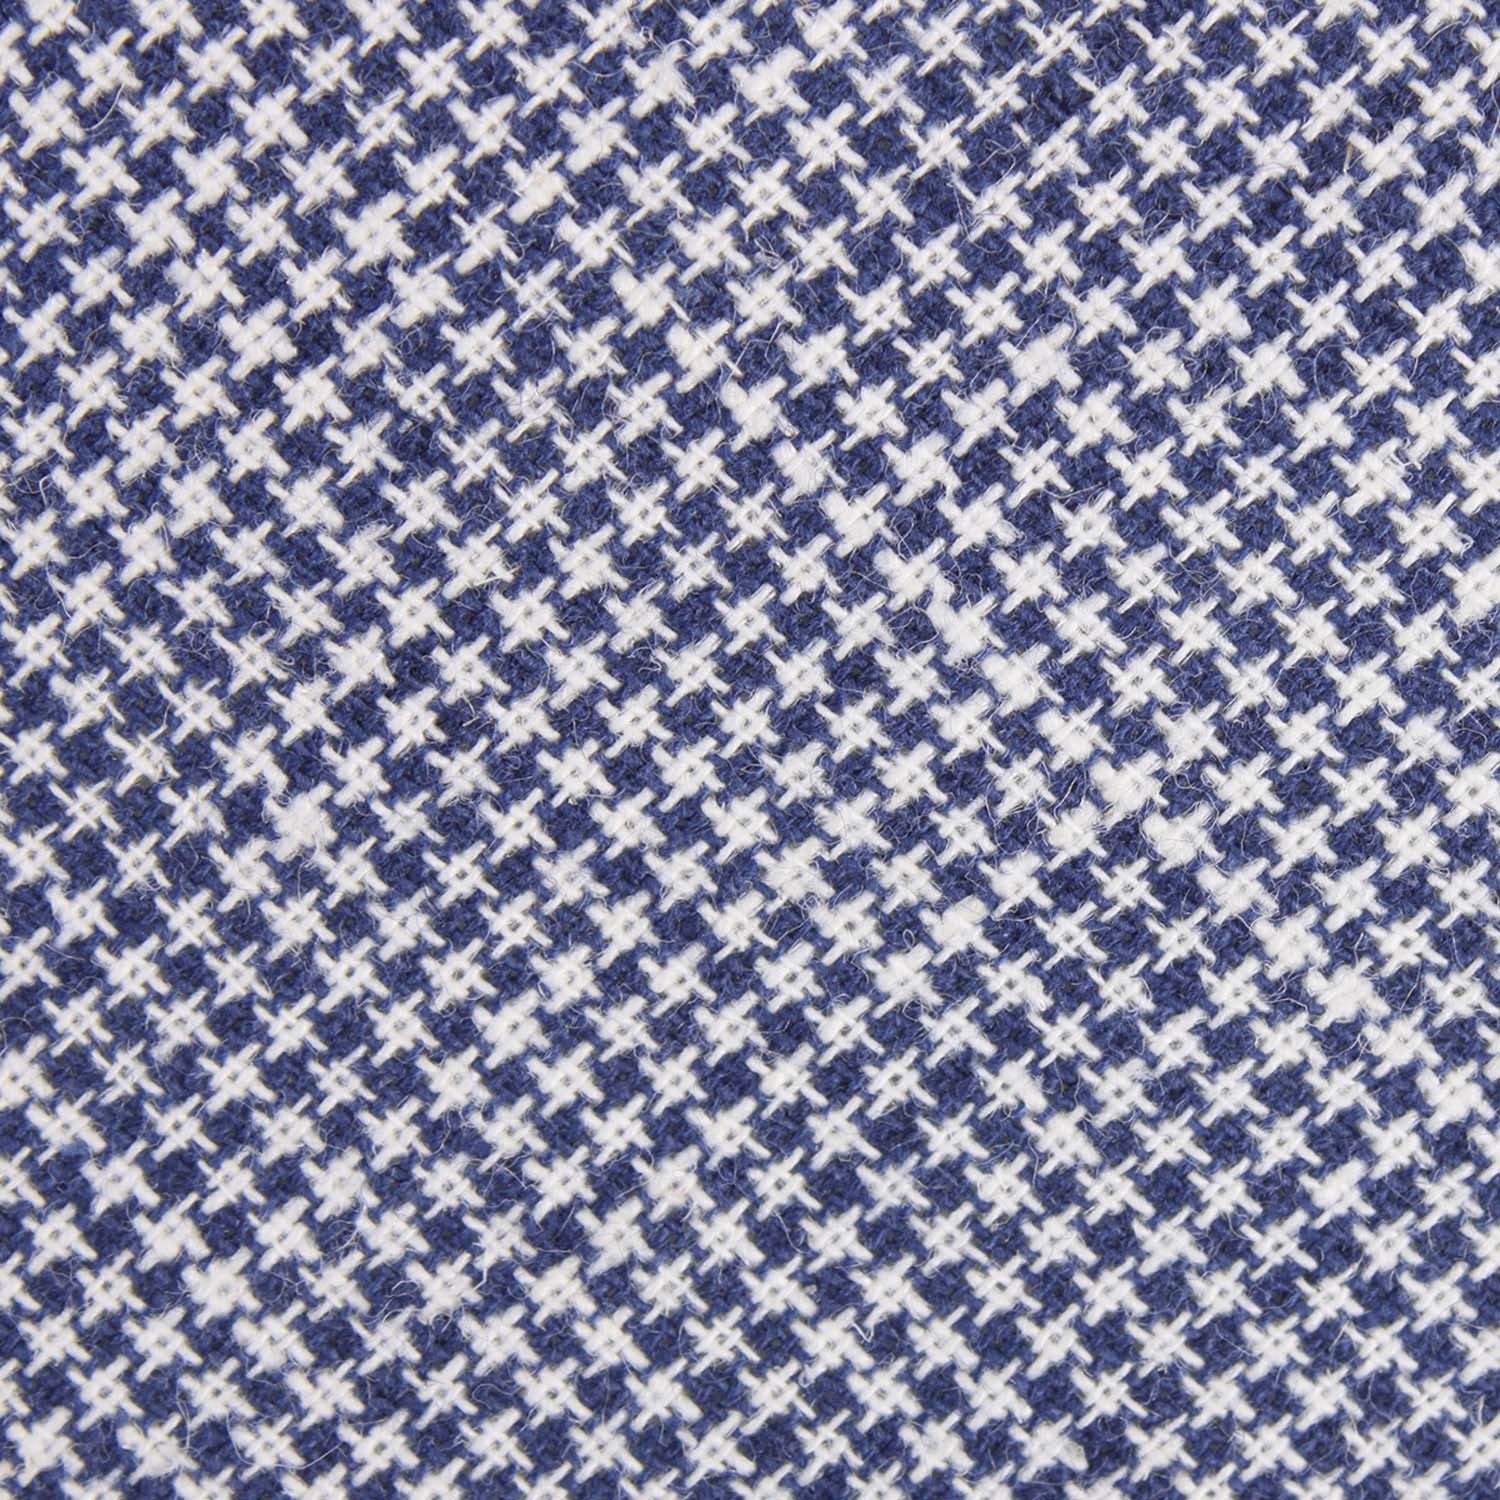 Navy Blue Houndstooth Linen Fabric Self Tie Bow Tie L181